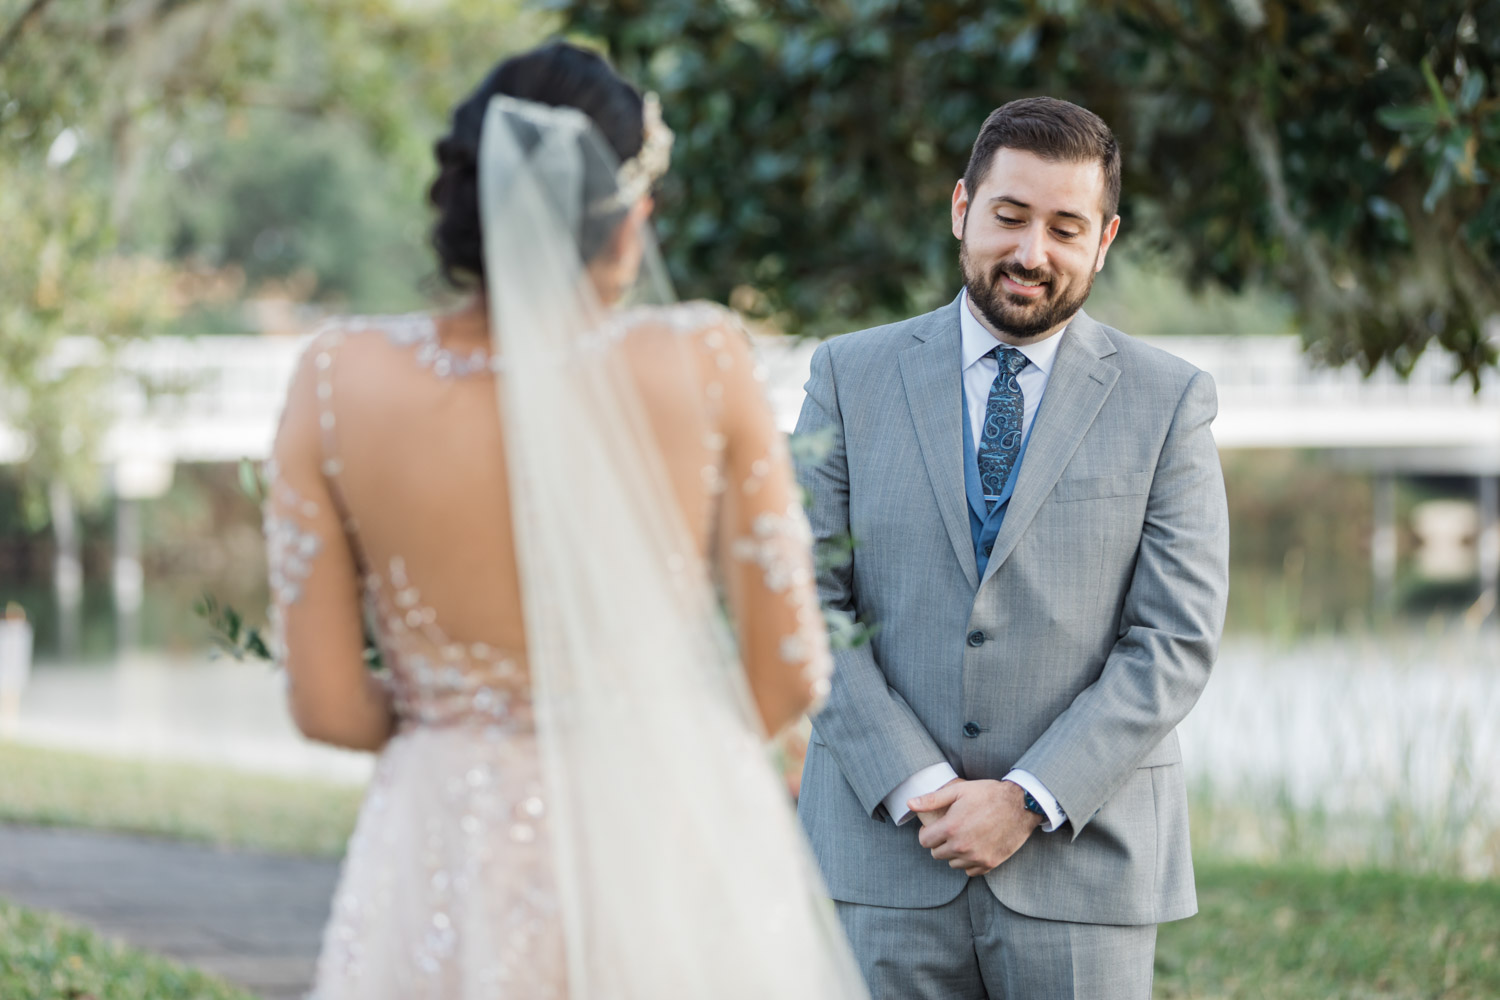 Groom in gray suit and blue tie smiling at bride during first look